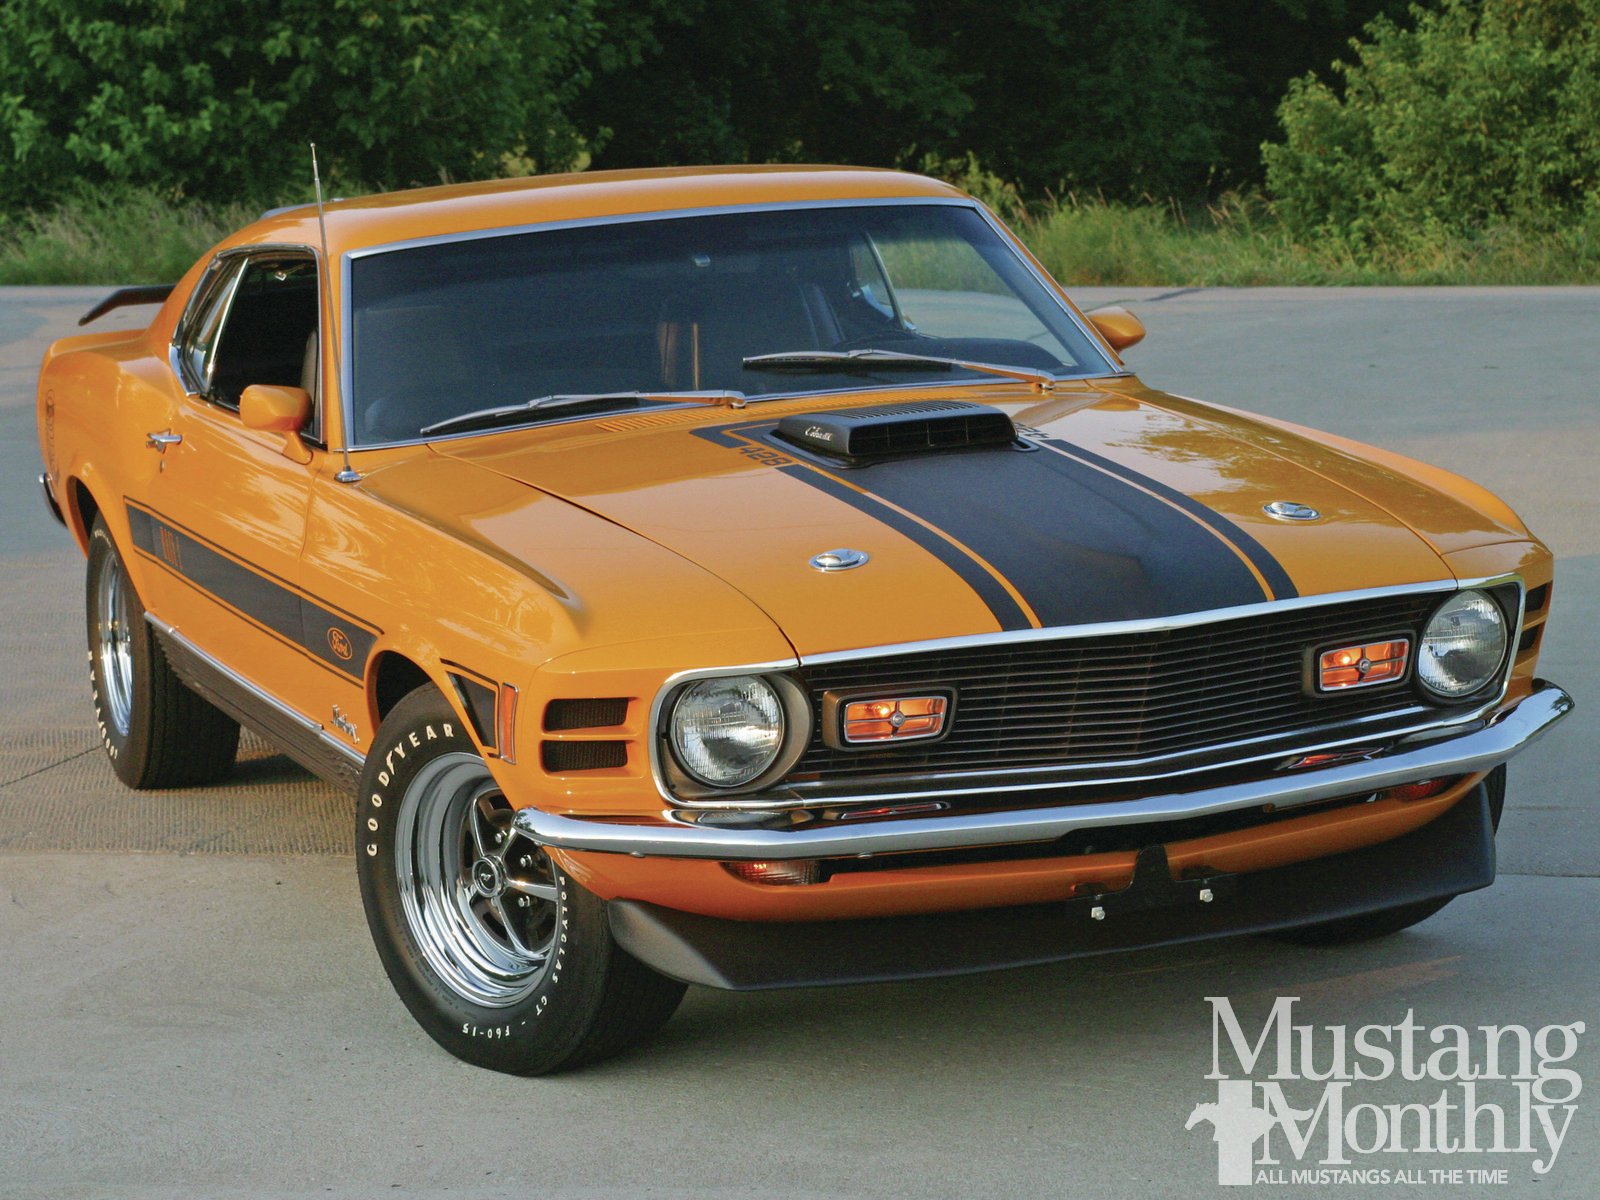 vehicles, ford mustang boss 429, fastback, ford mustang, muscle car, orange car, ford